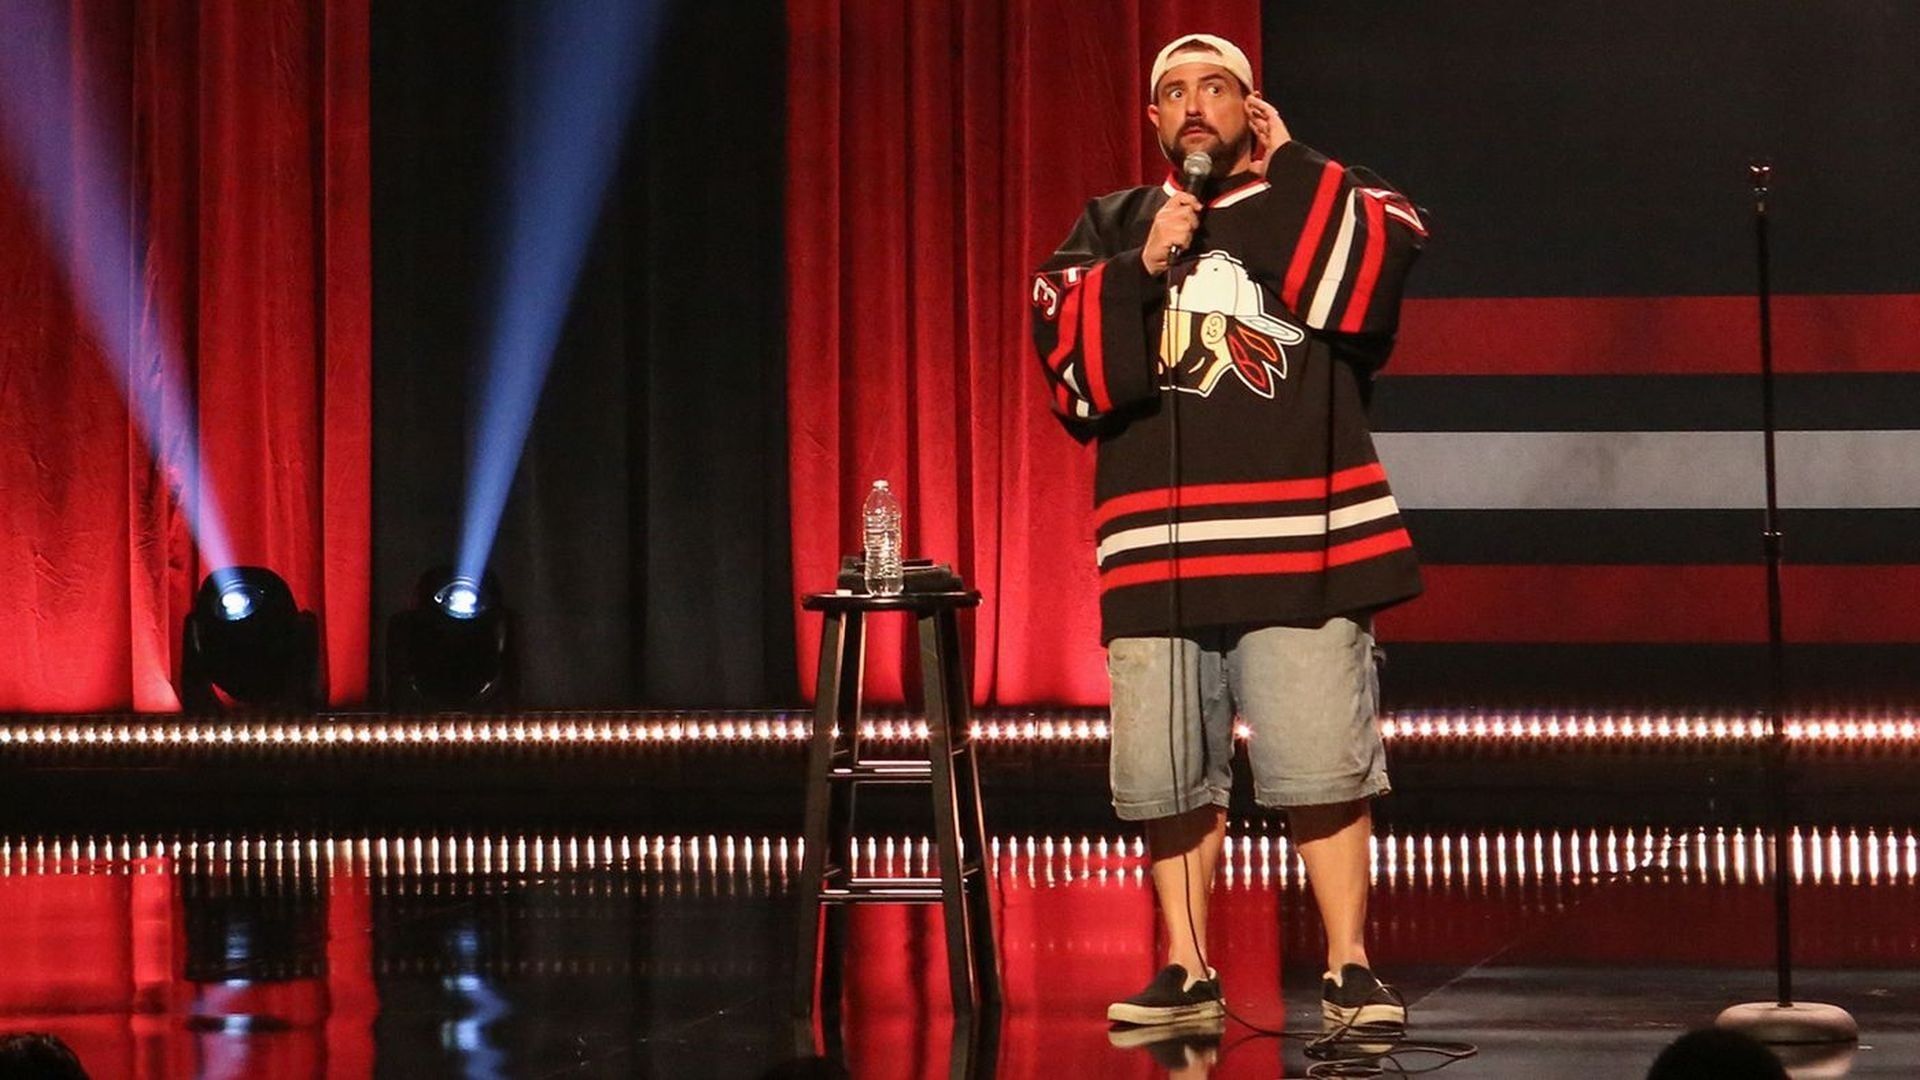 Kevin Smith: Silent But Deadly Backdrop